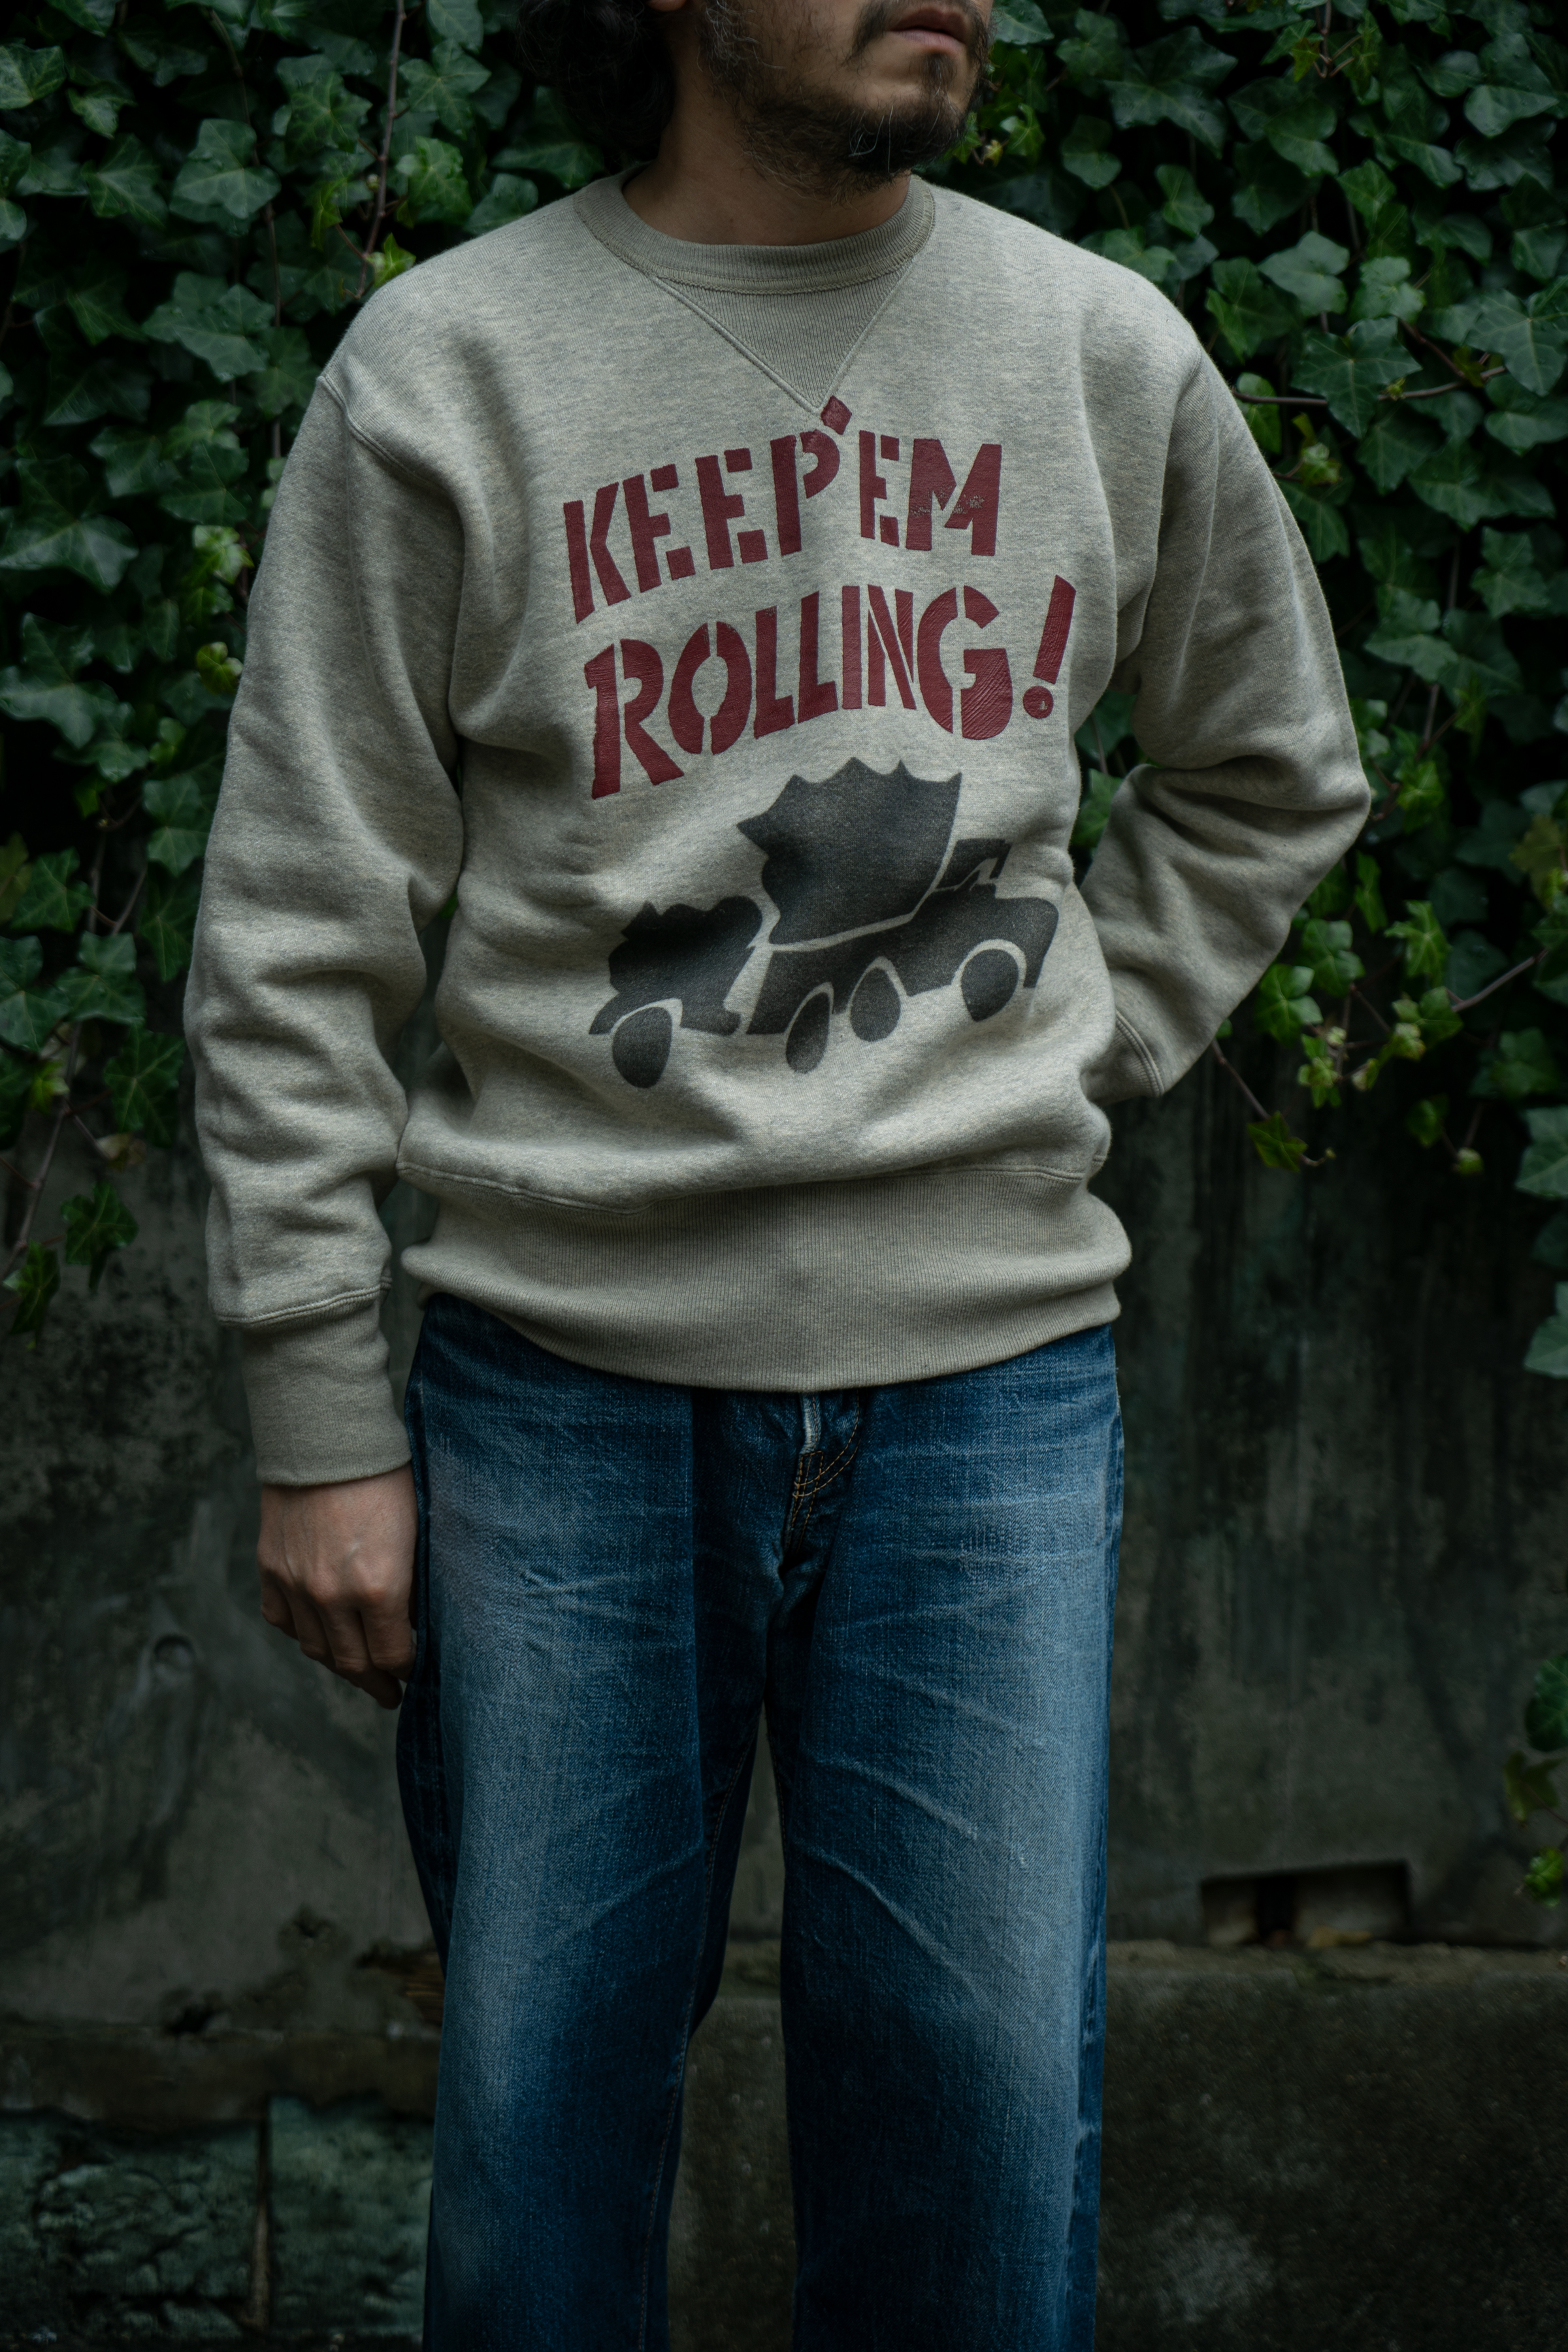 MILITARY PRINT SWEATSHIRT / RED BALL HIGHWAY – The Real McCoy's